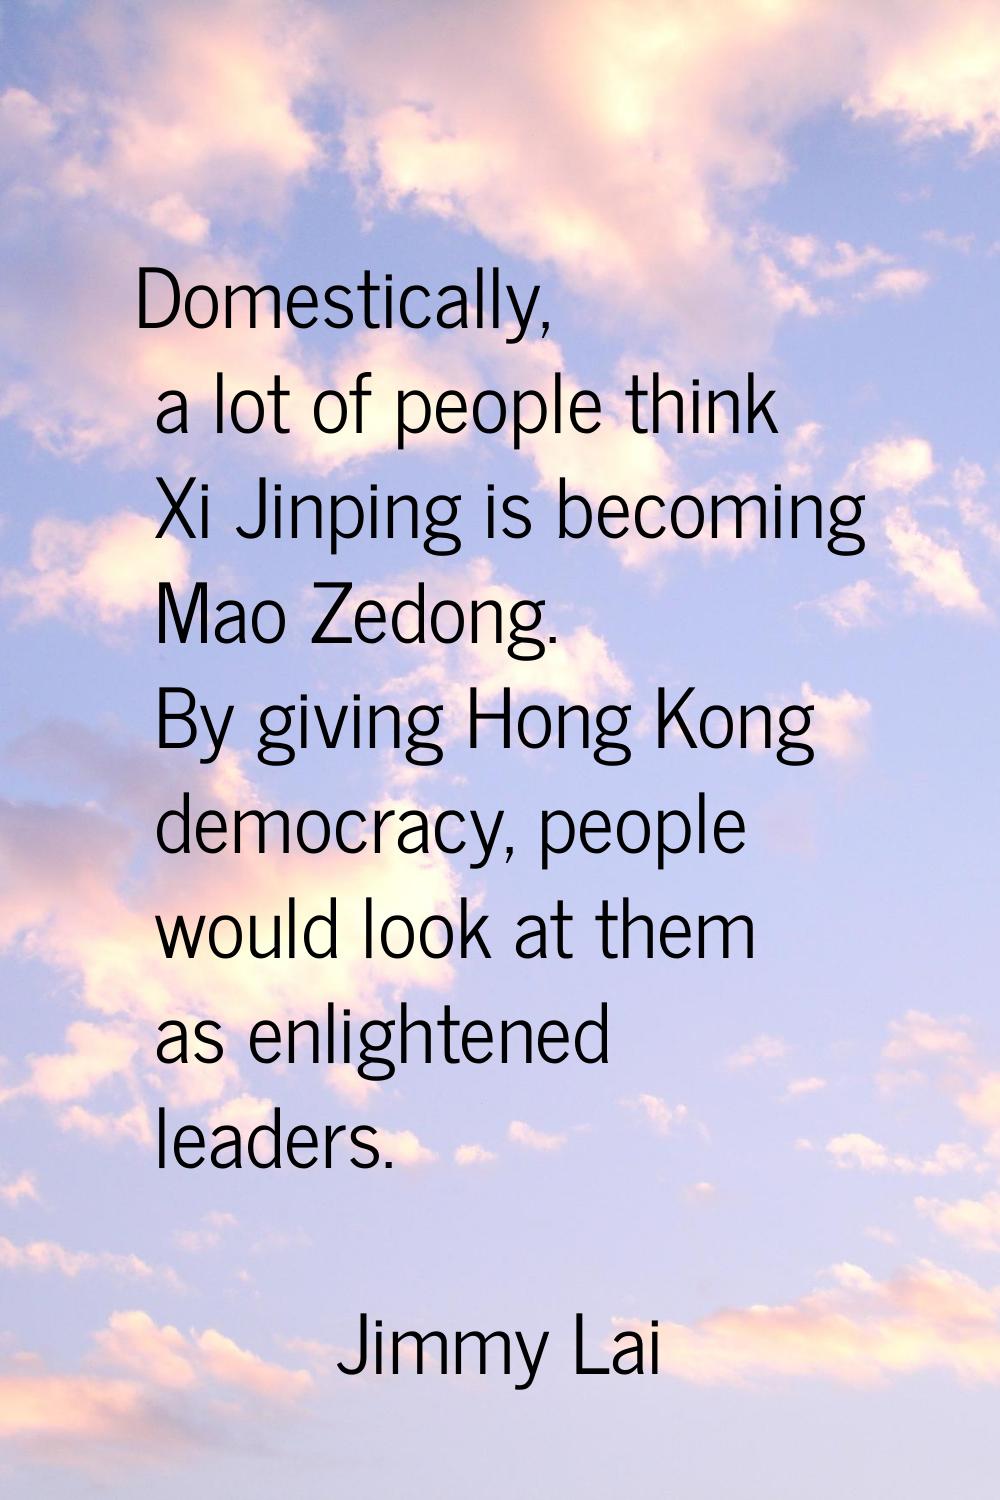 Domestically, a lot of people think Xi Jinping is becoming Mao Zedong. By giving Hong Kong democrac